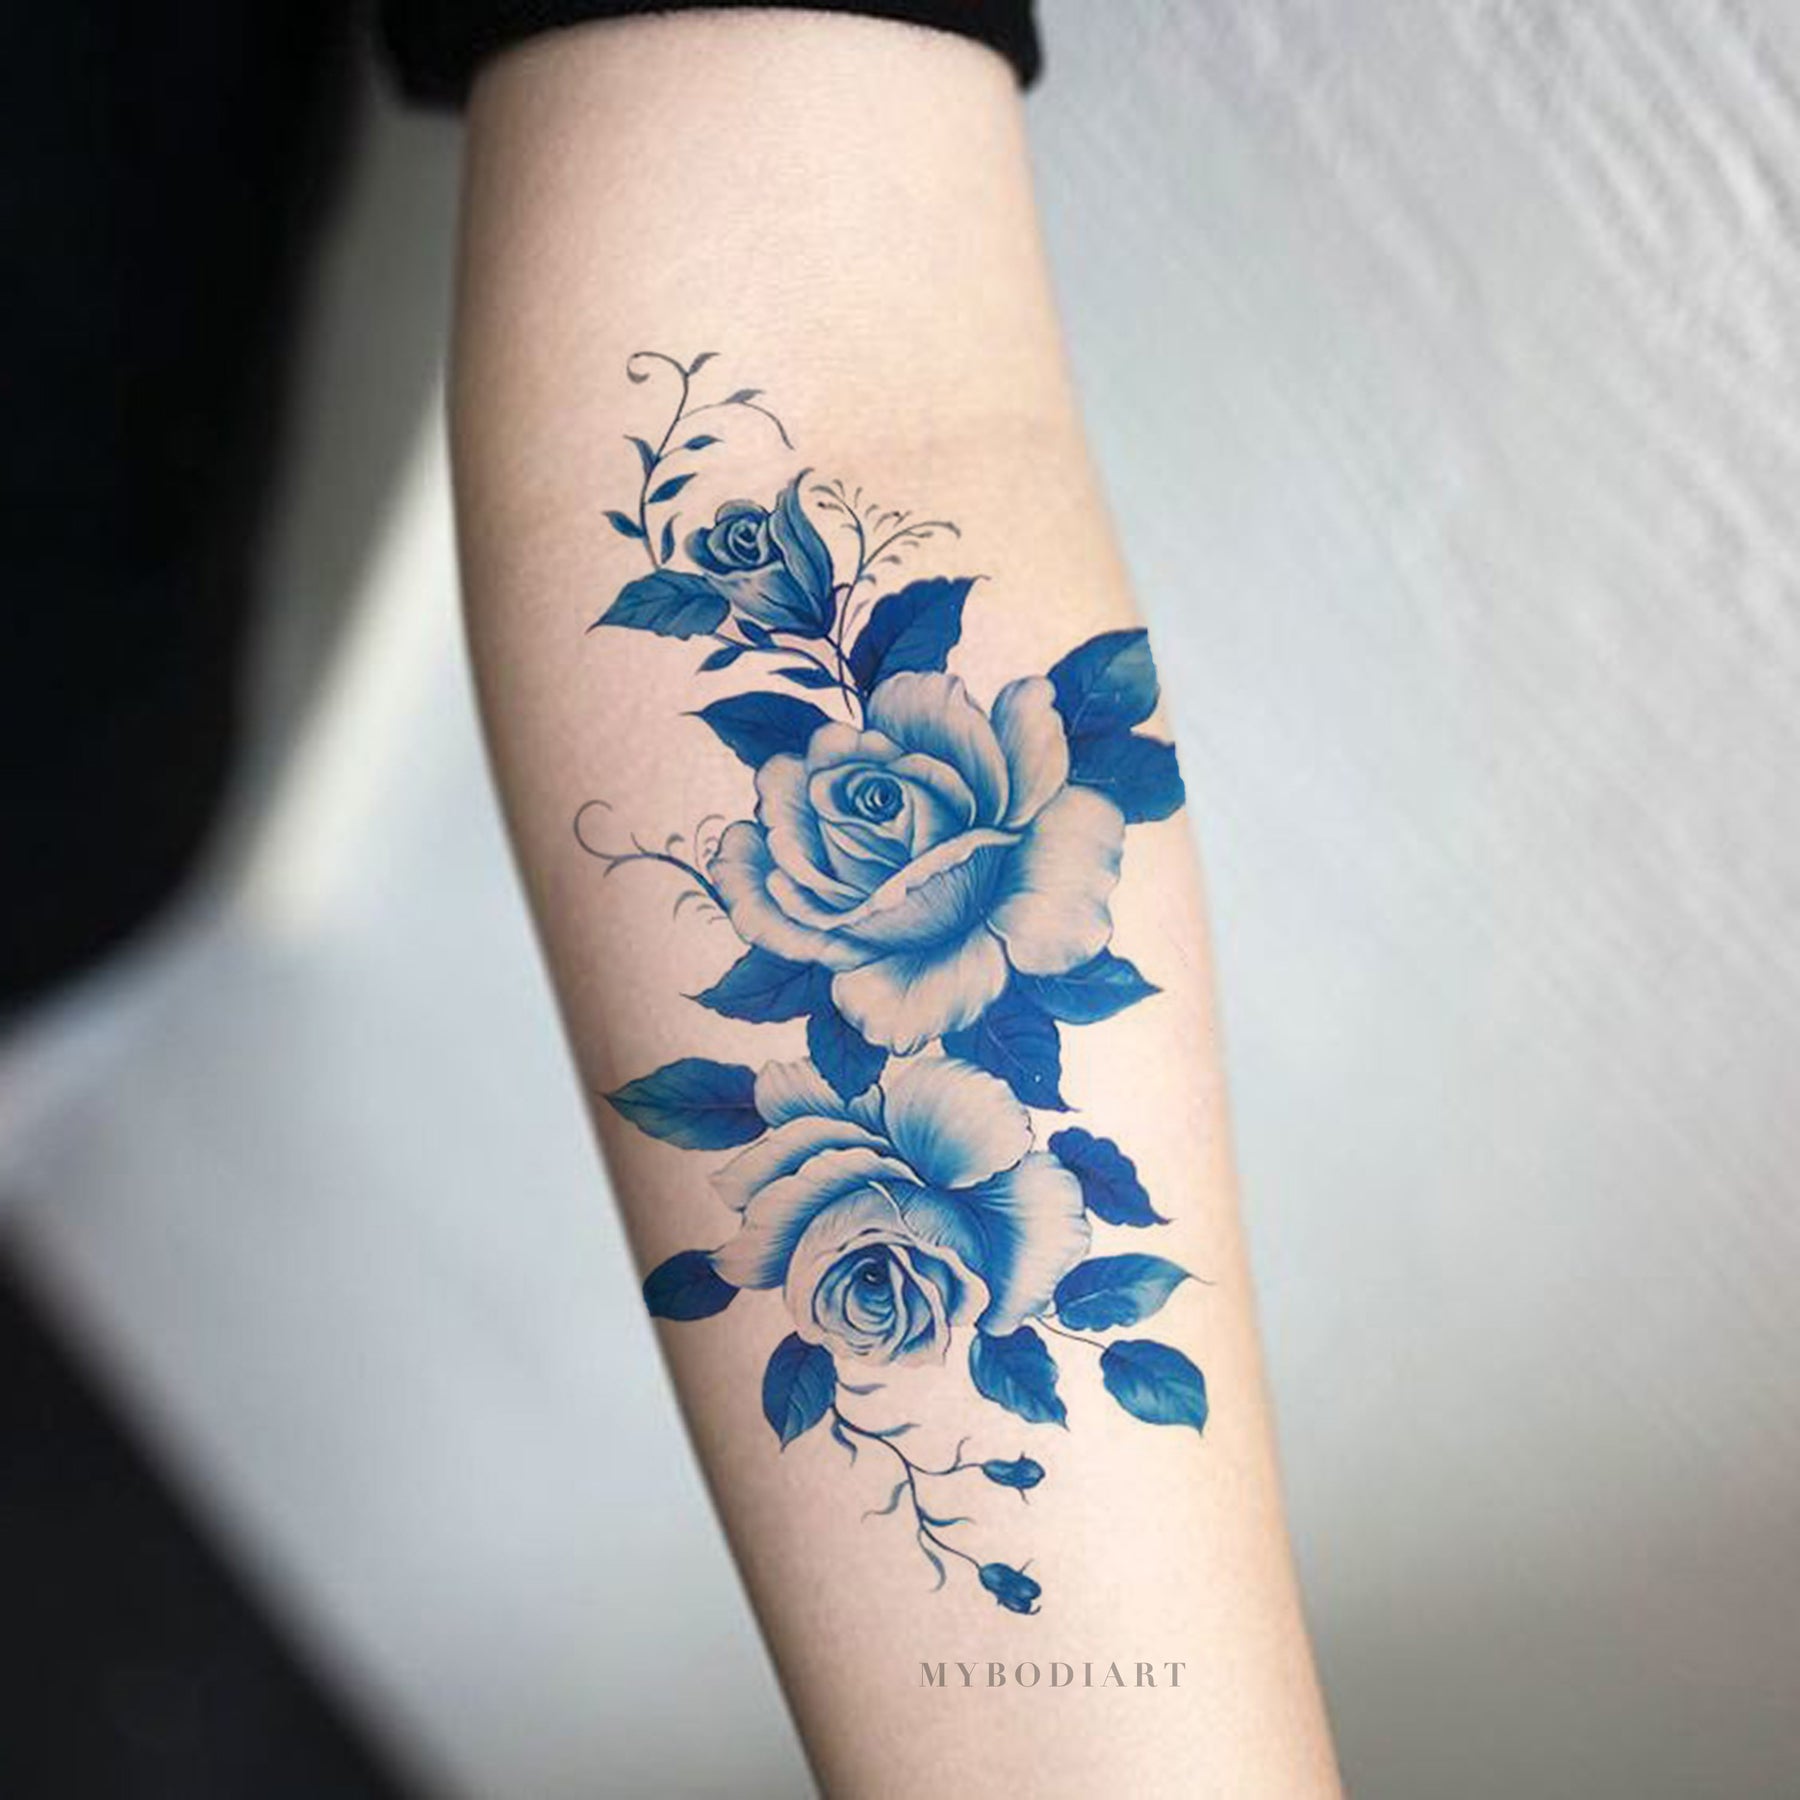 20 Rose Tattoo Ideas That Are Cute AF  Society19